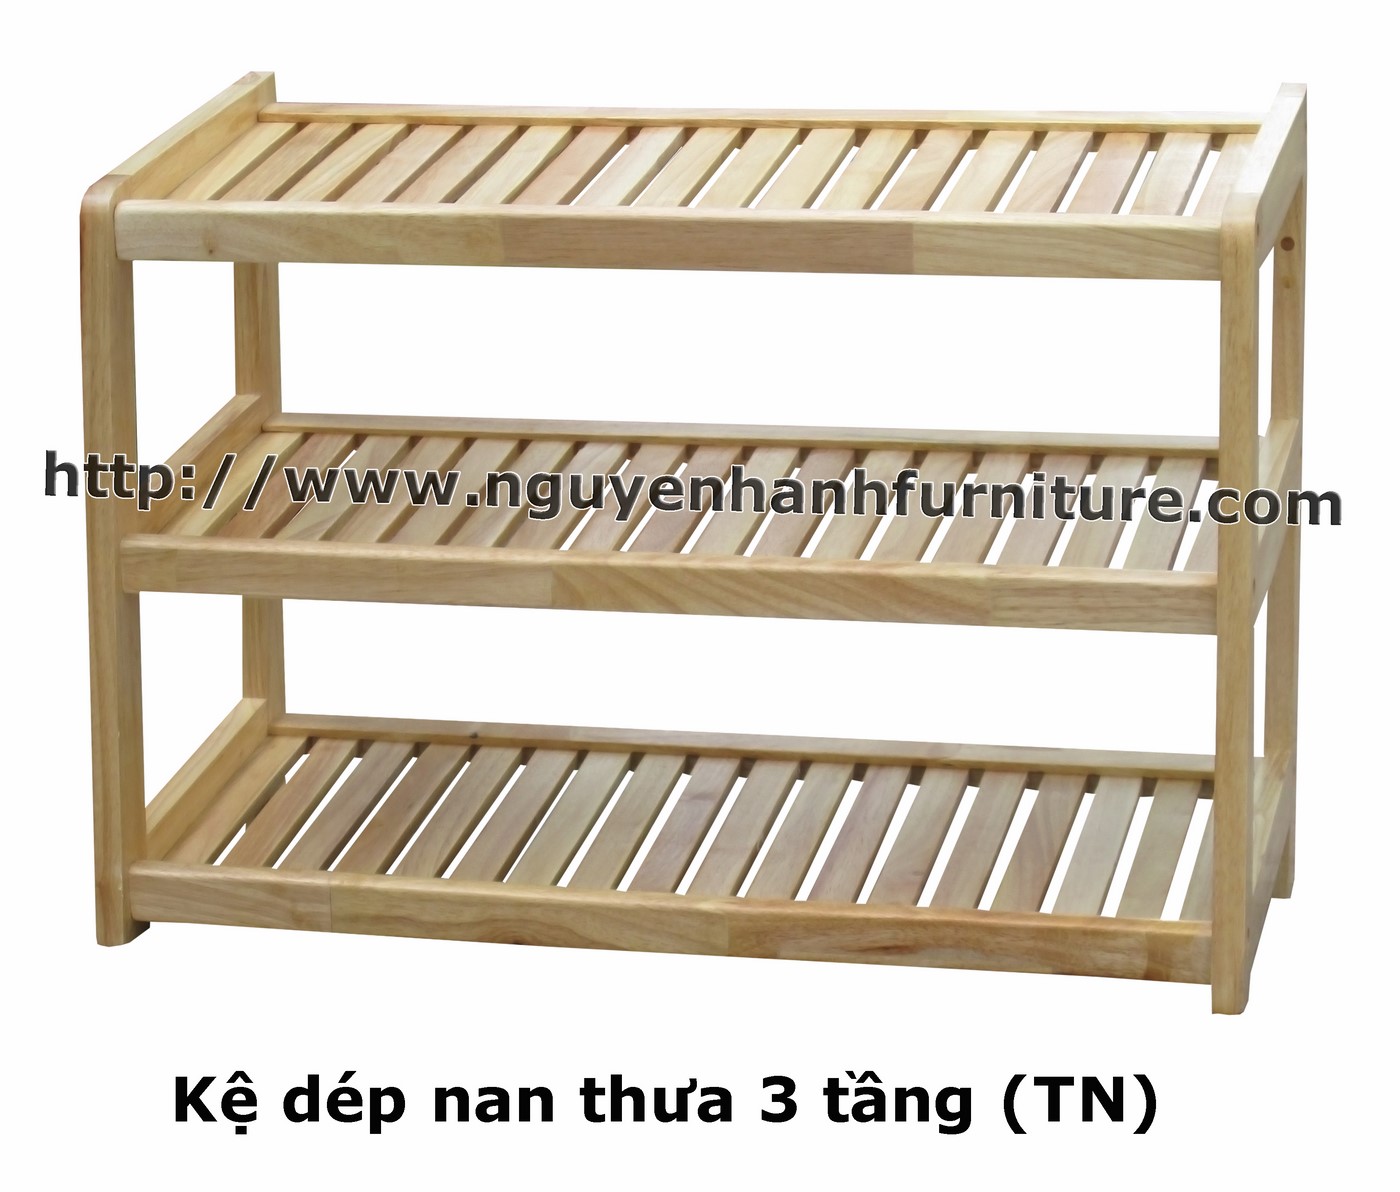 Name product: Shoeshelf 3 Floors with sparse blades (Natural) - Dimensions: 62 x 30 x 45 (H) - Description: Wood natural rubbe